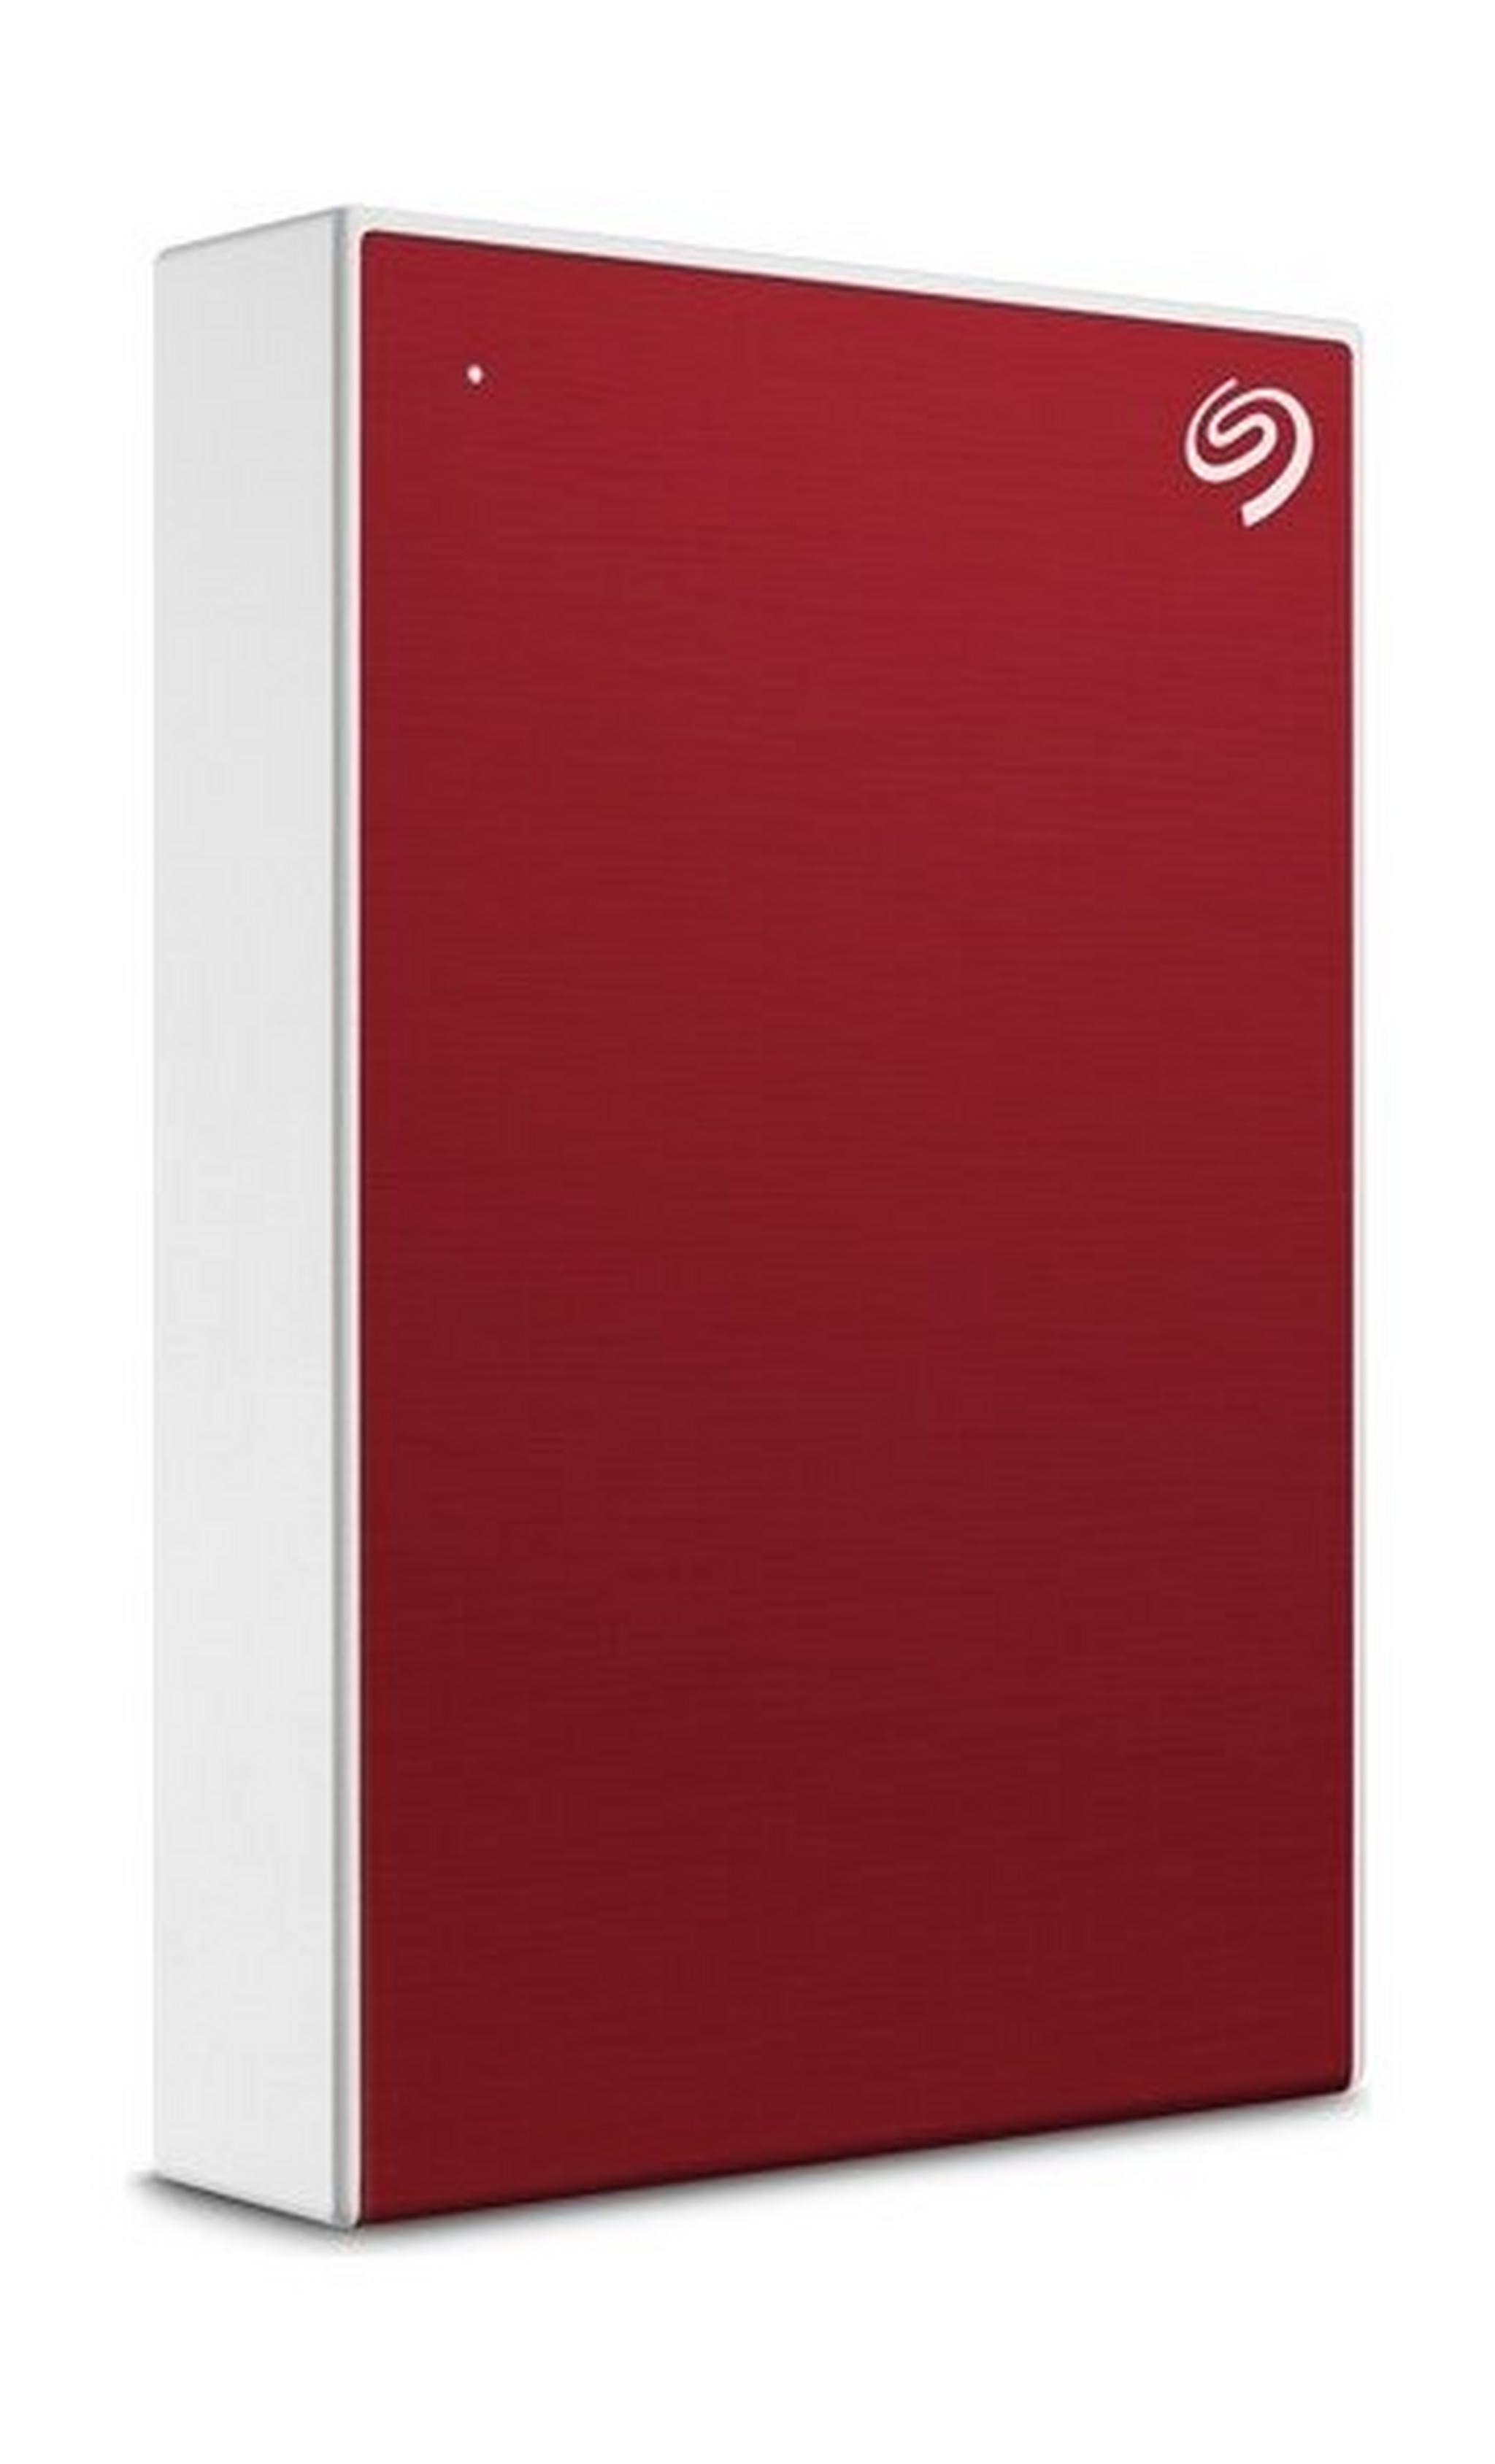 Seagate One Touch 5TB USB 3.2 Gen 1 External Hard Drive - Red